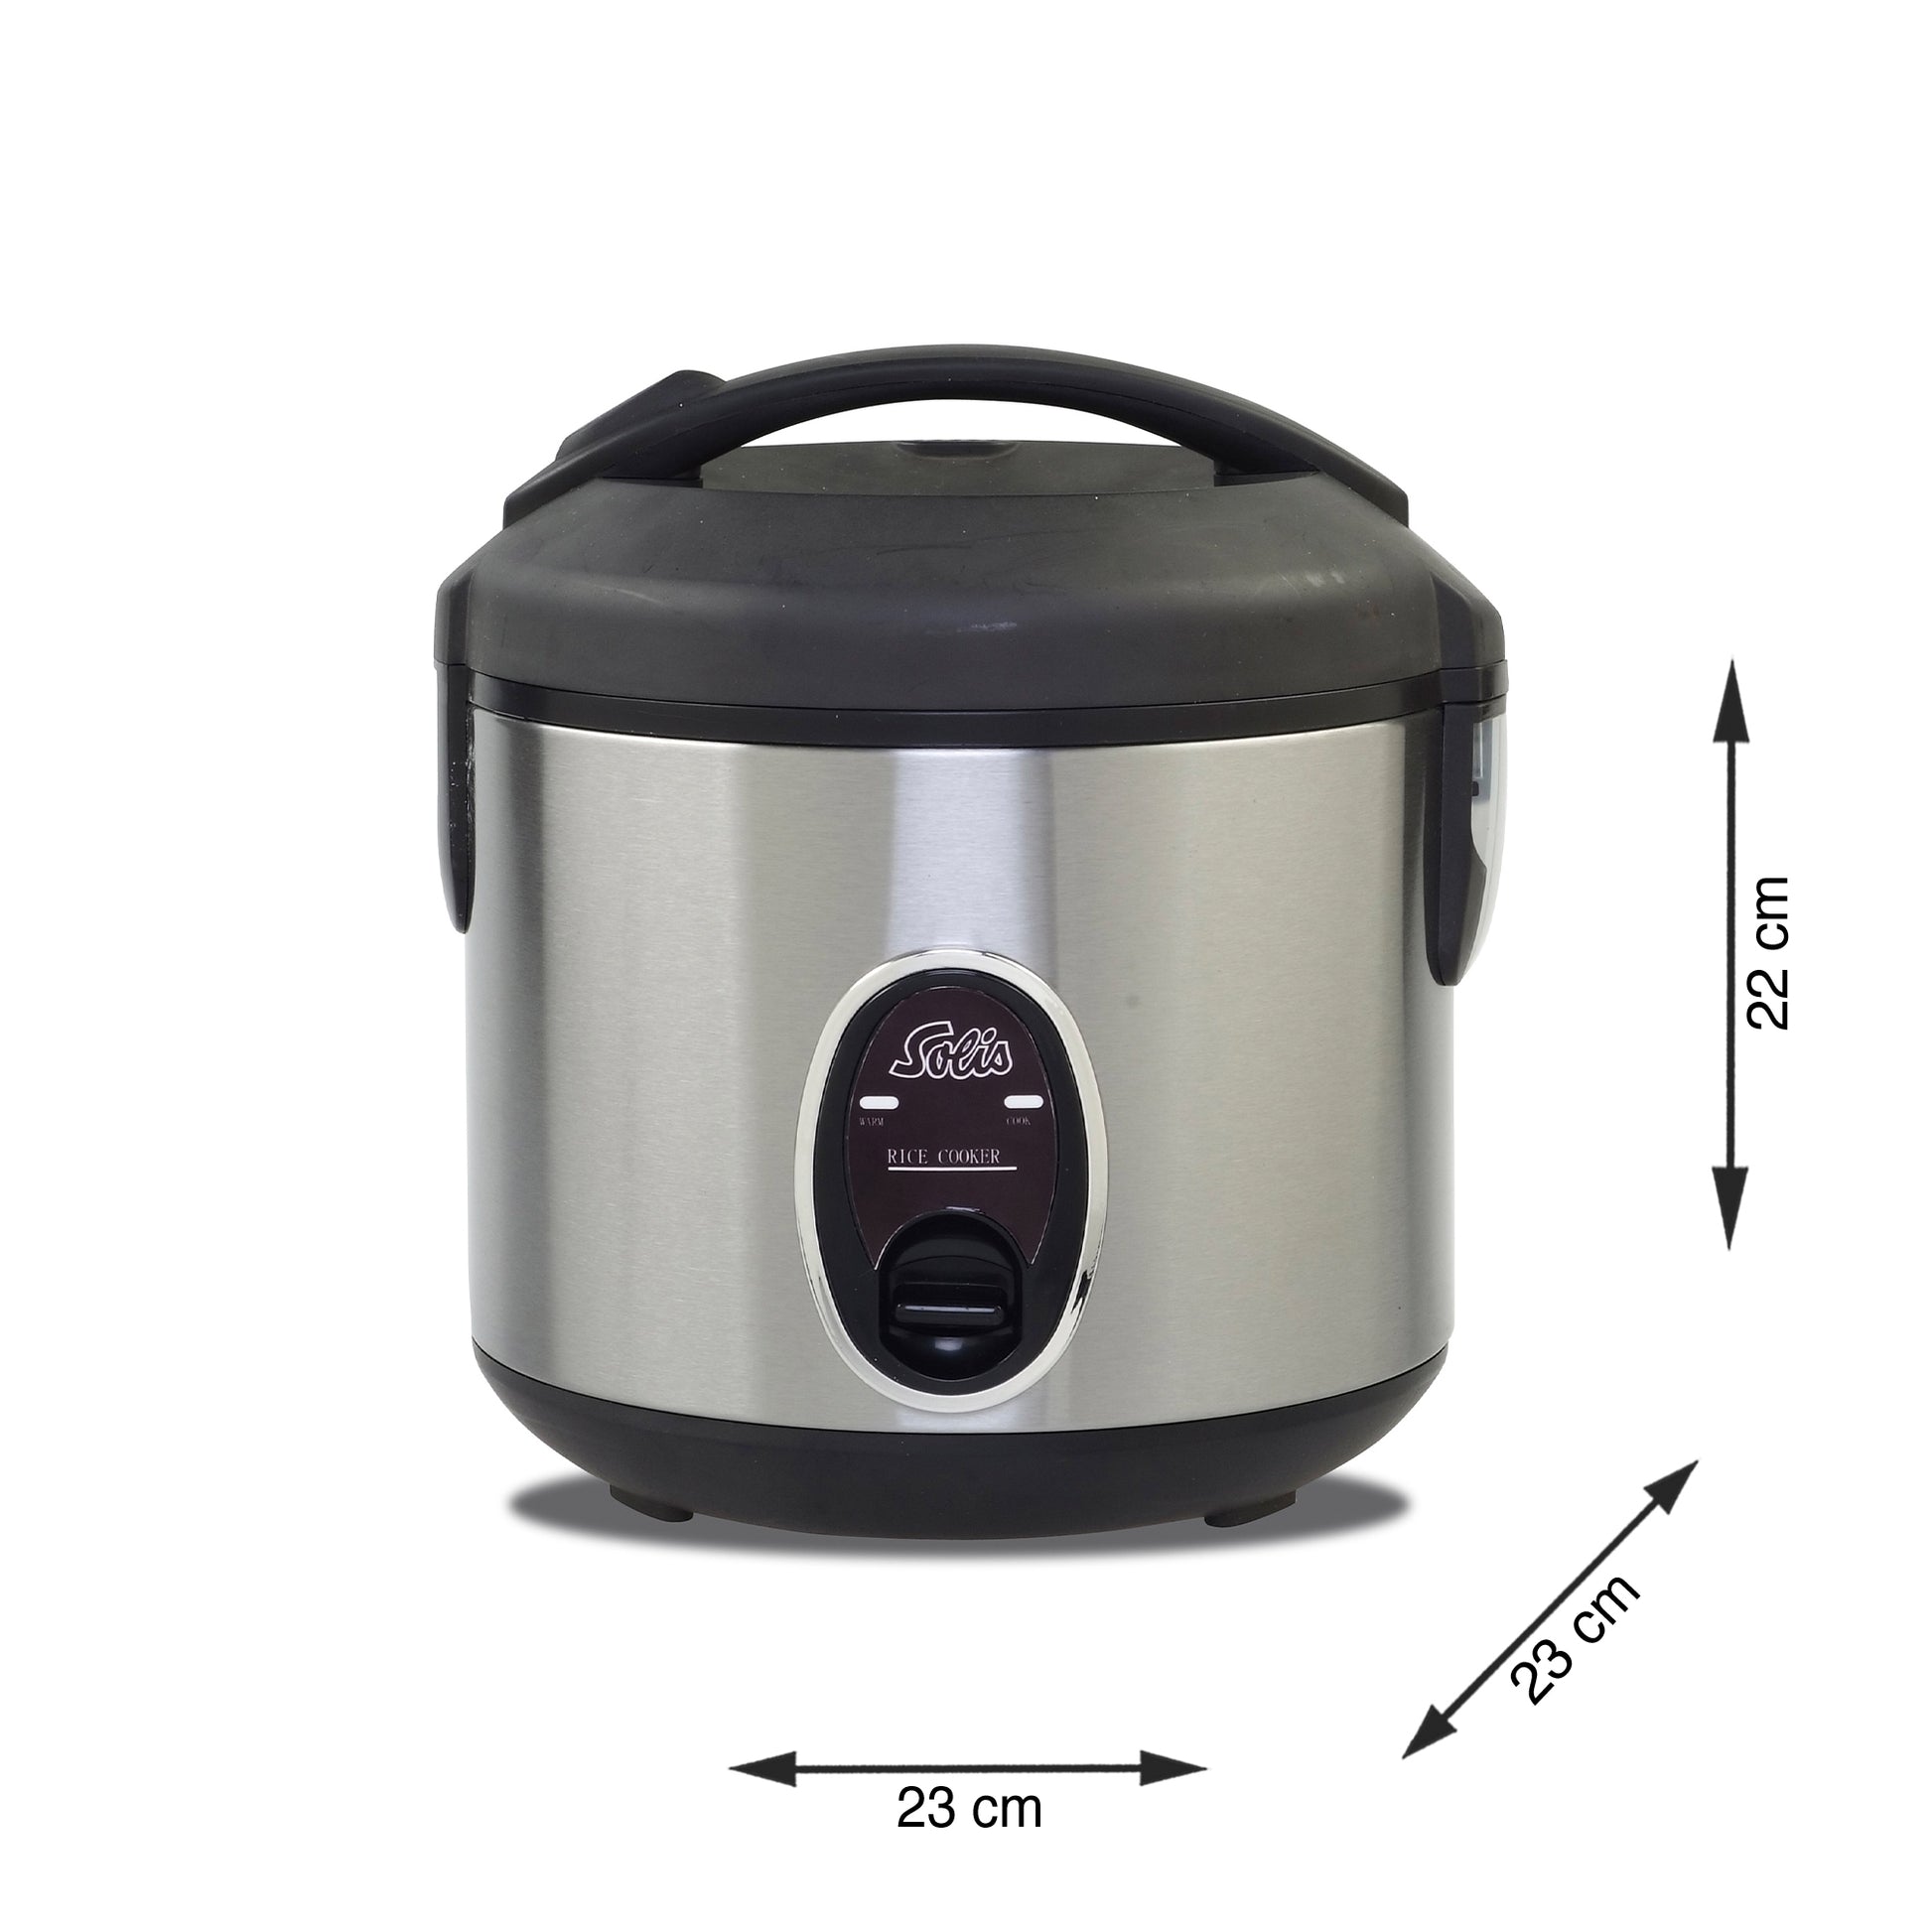 Rice Cooker Compact (Typ 821) B-Ware